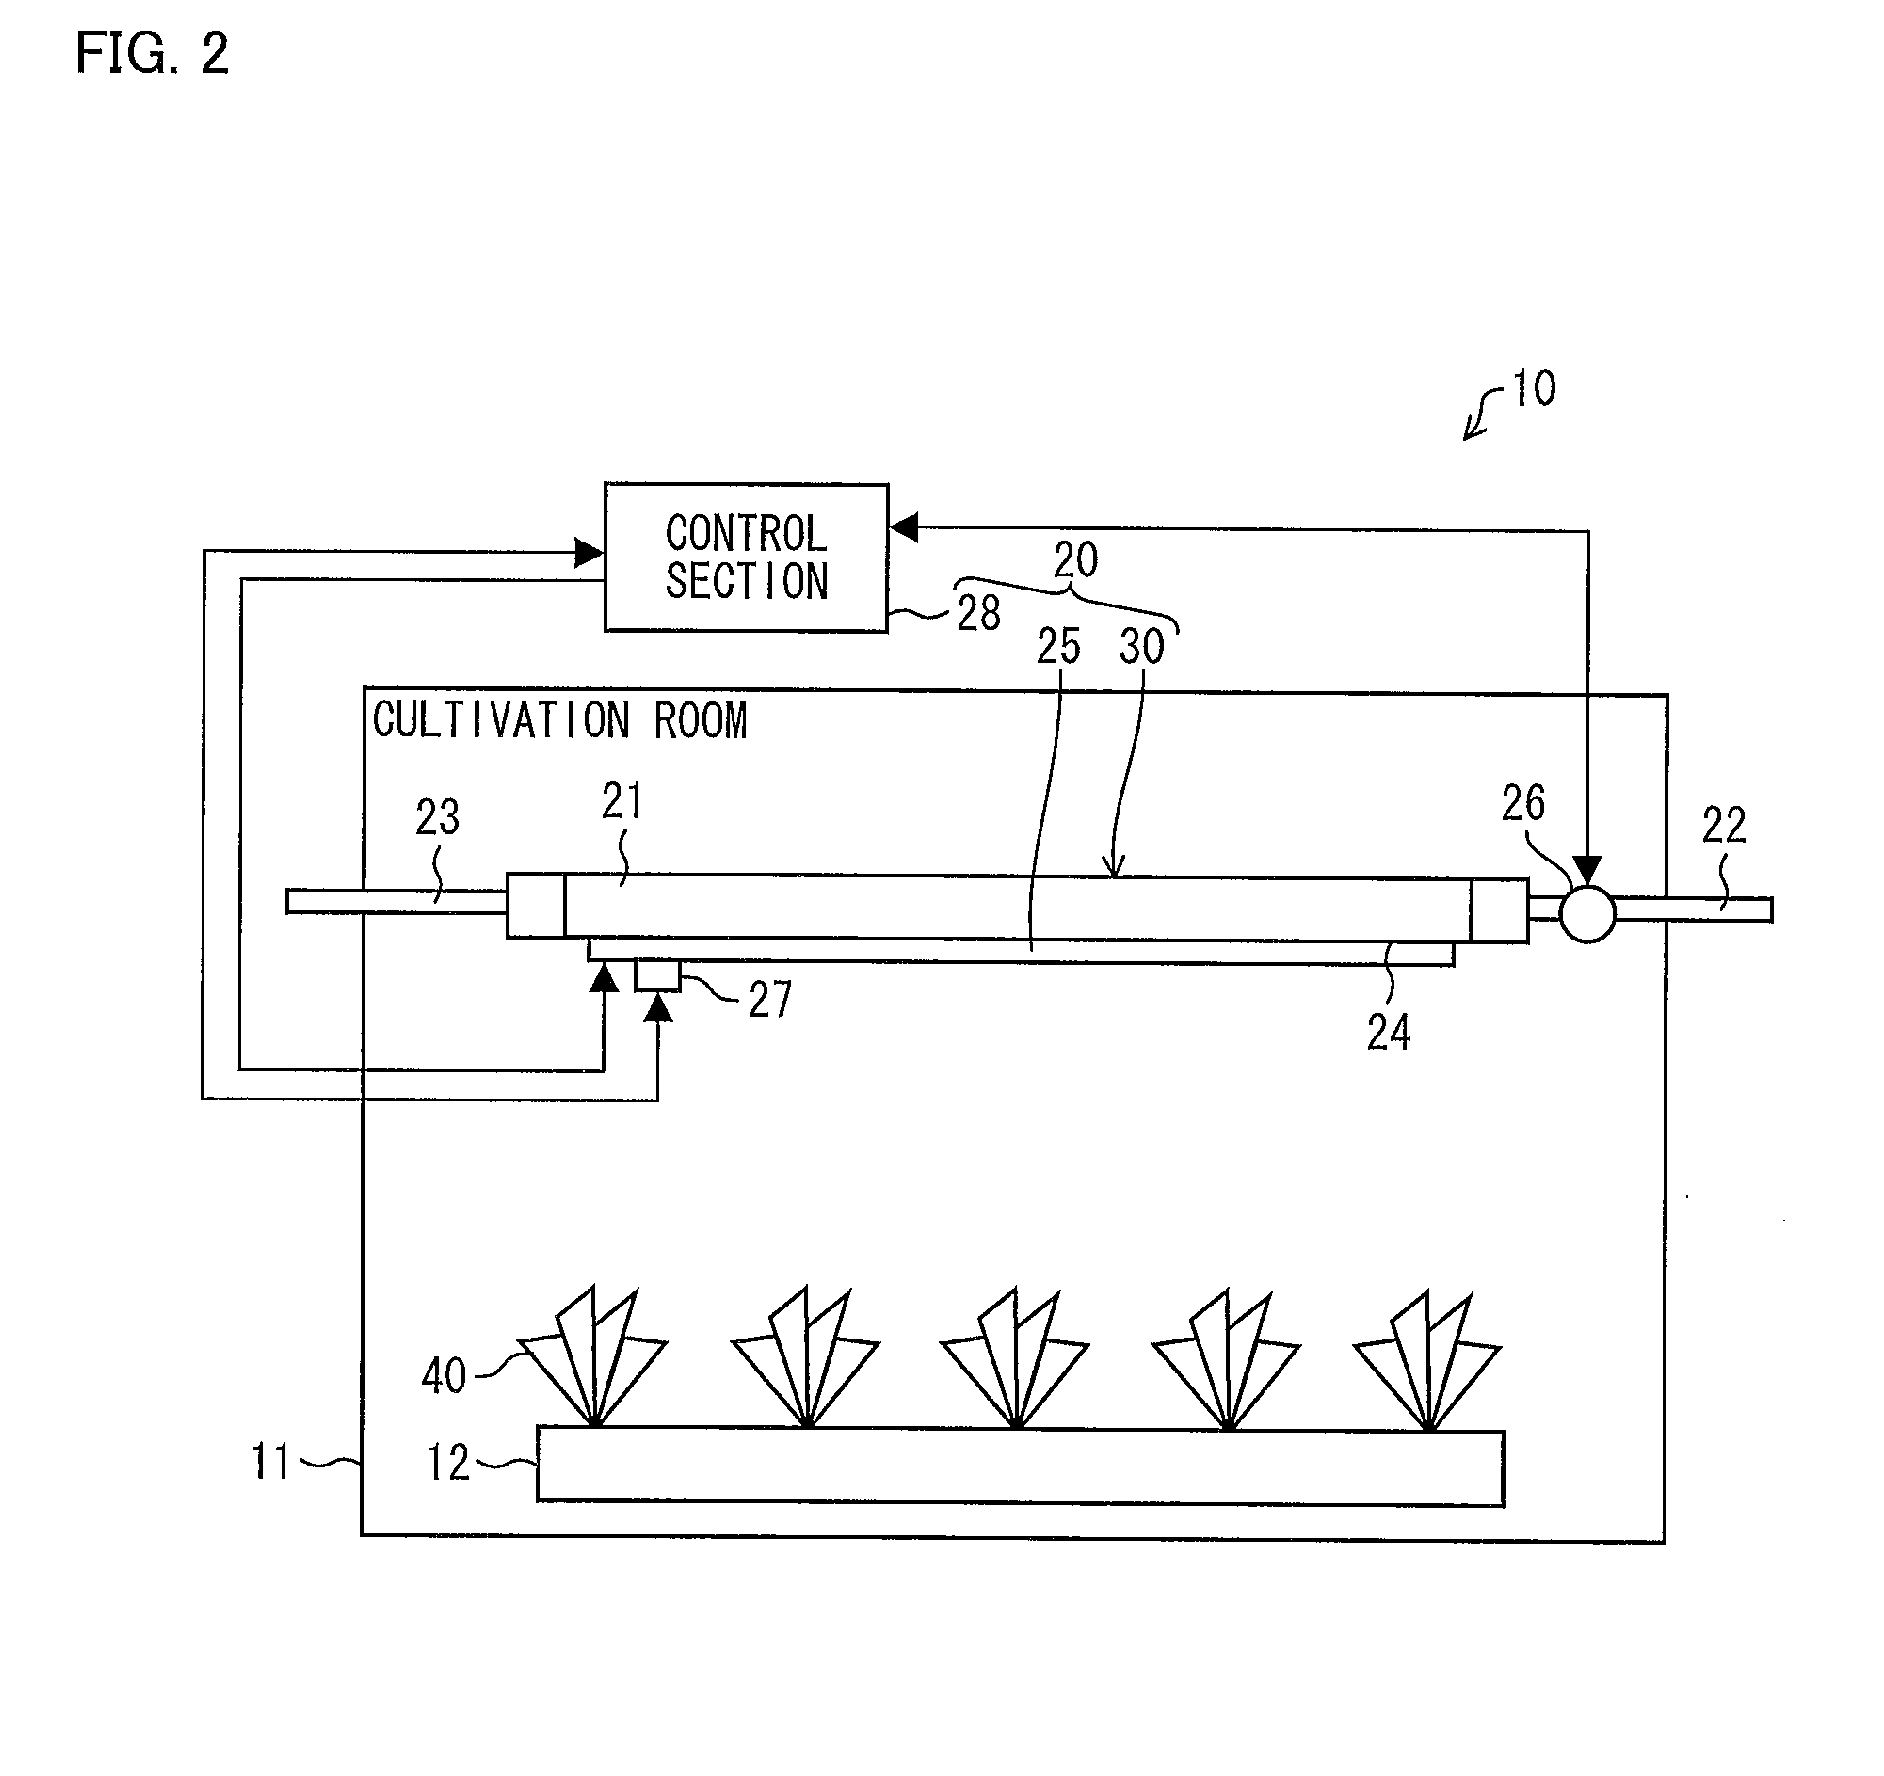 Lighting device, plant cultivation device, and method for cooling lighting device